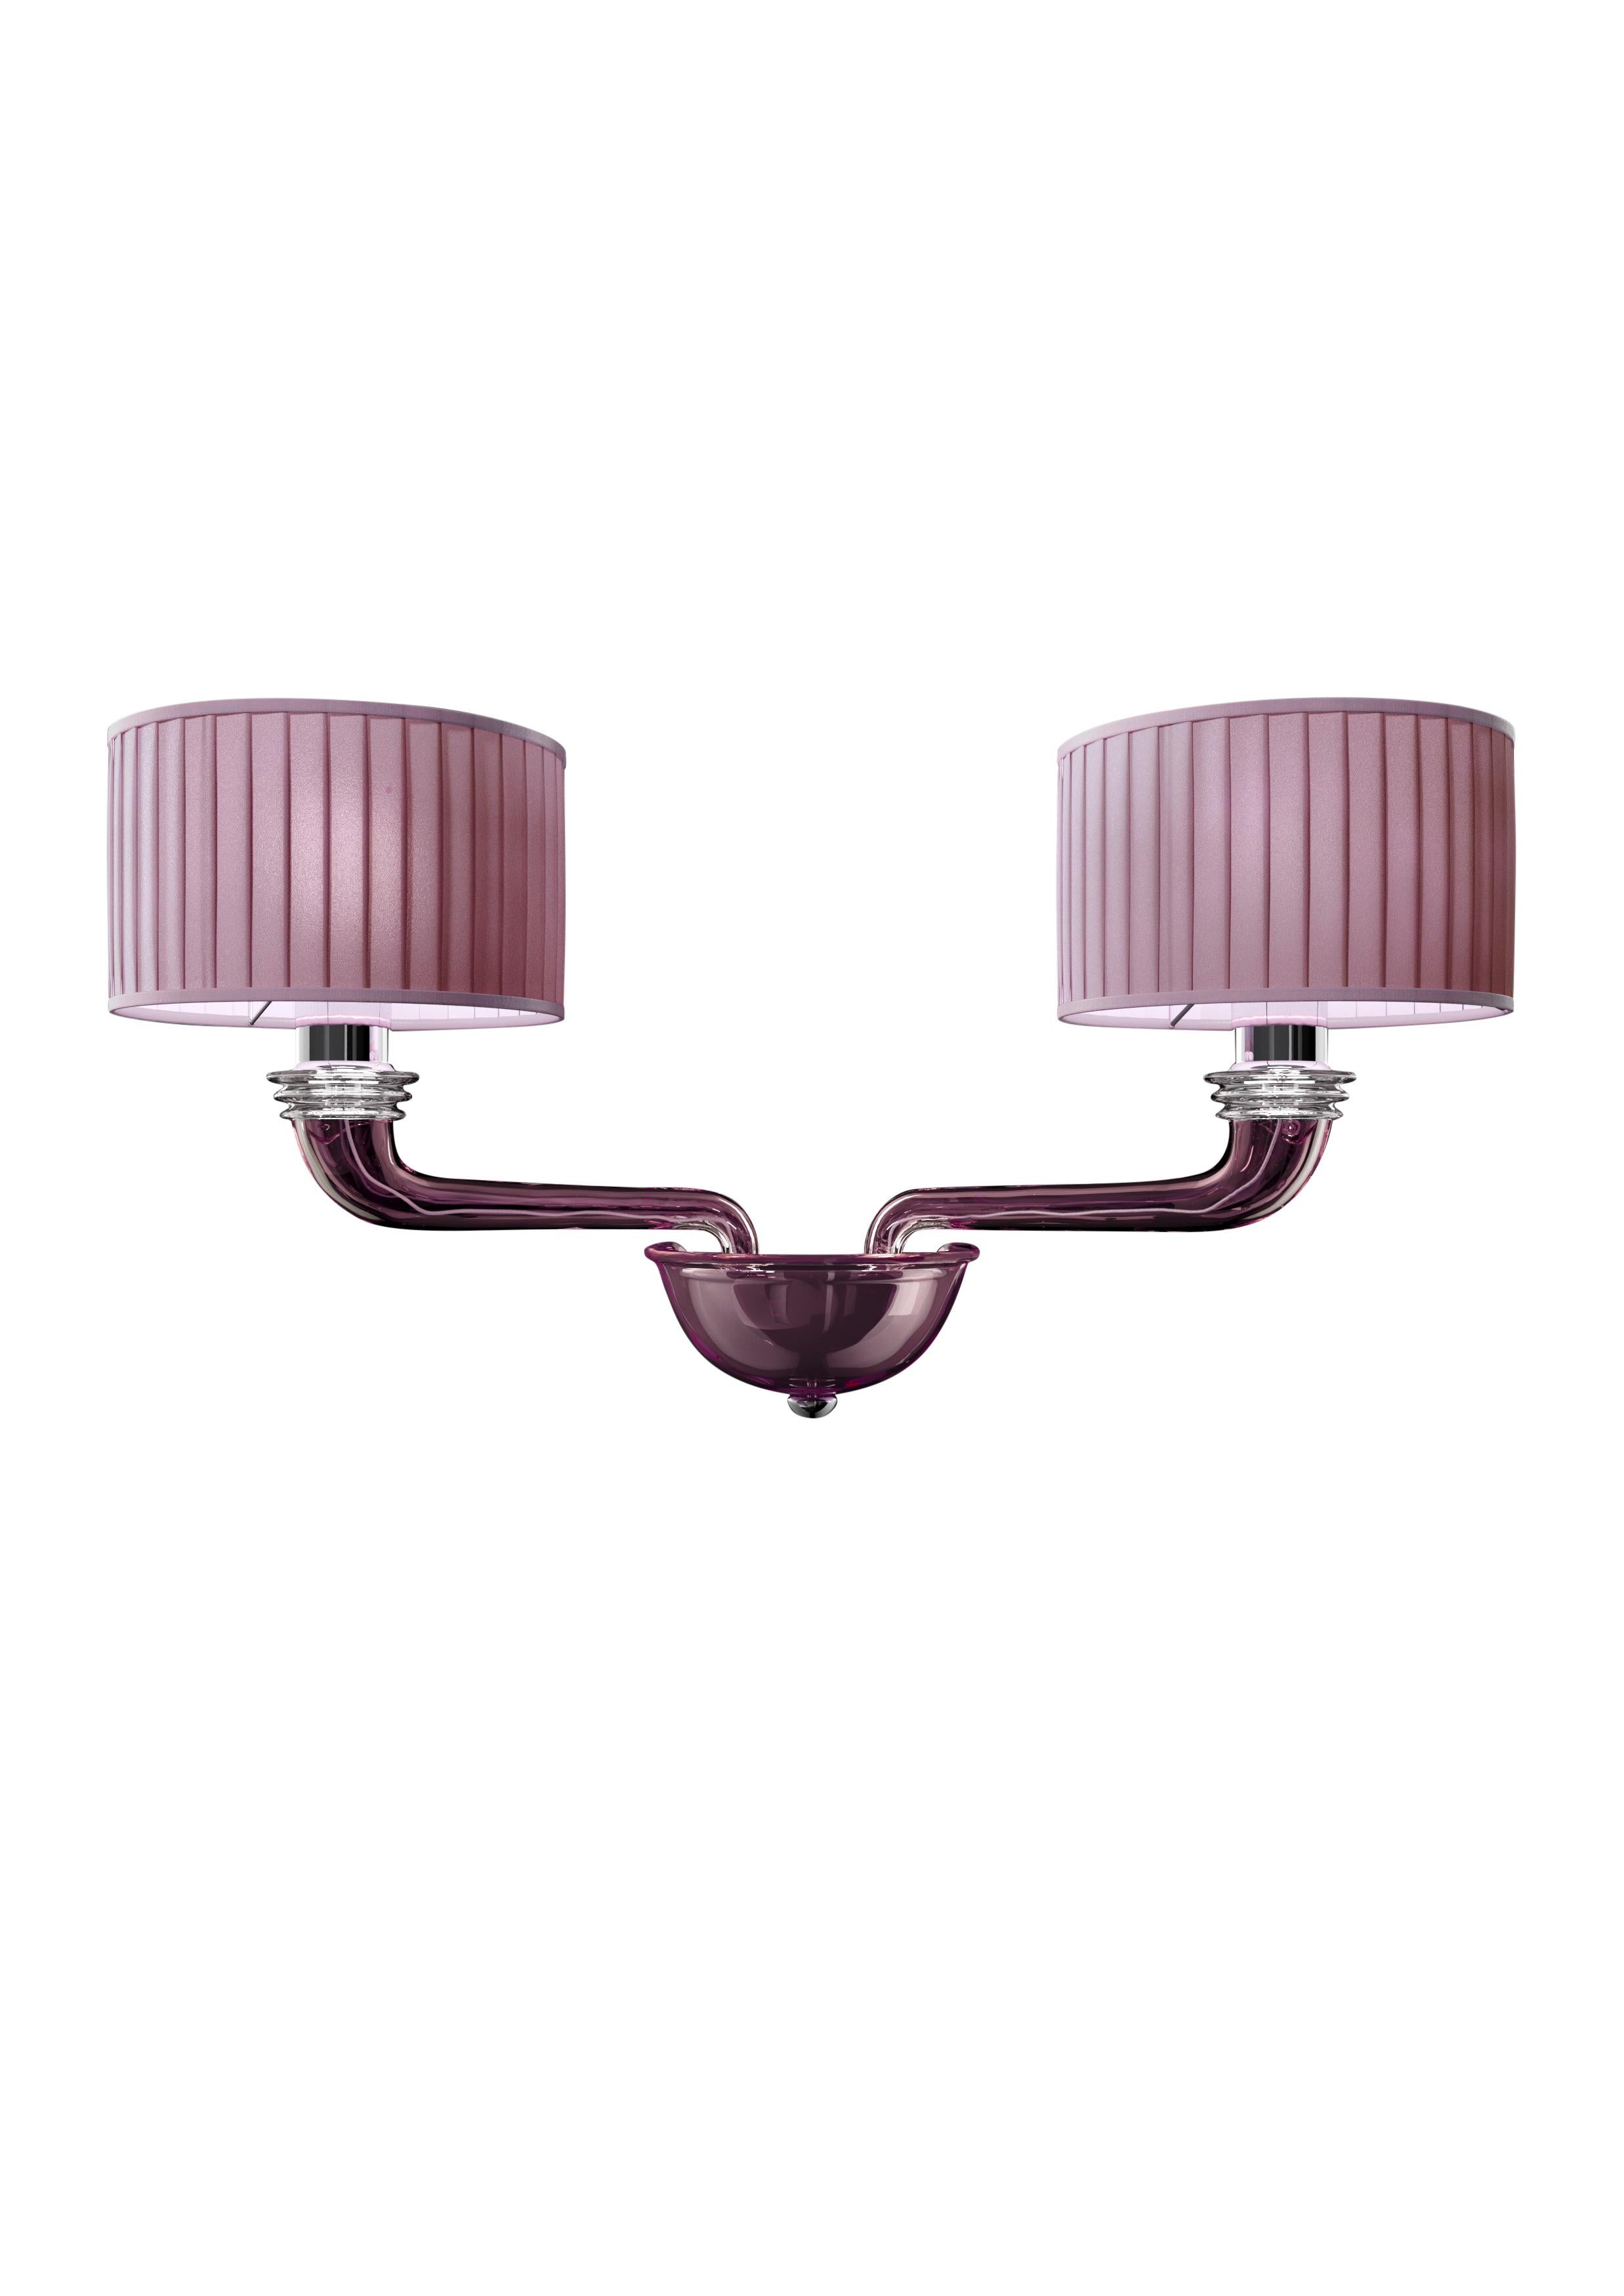 Here you are shown the Babylon 5599 02 Wall Sconce in Dark Chrome Finishing and White Shade, originally designed in 2008. The Babylon is a linear, elegant light, with straight arms and pleated lampshades created entirely in fabric without internal